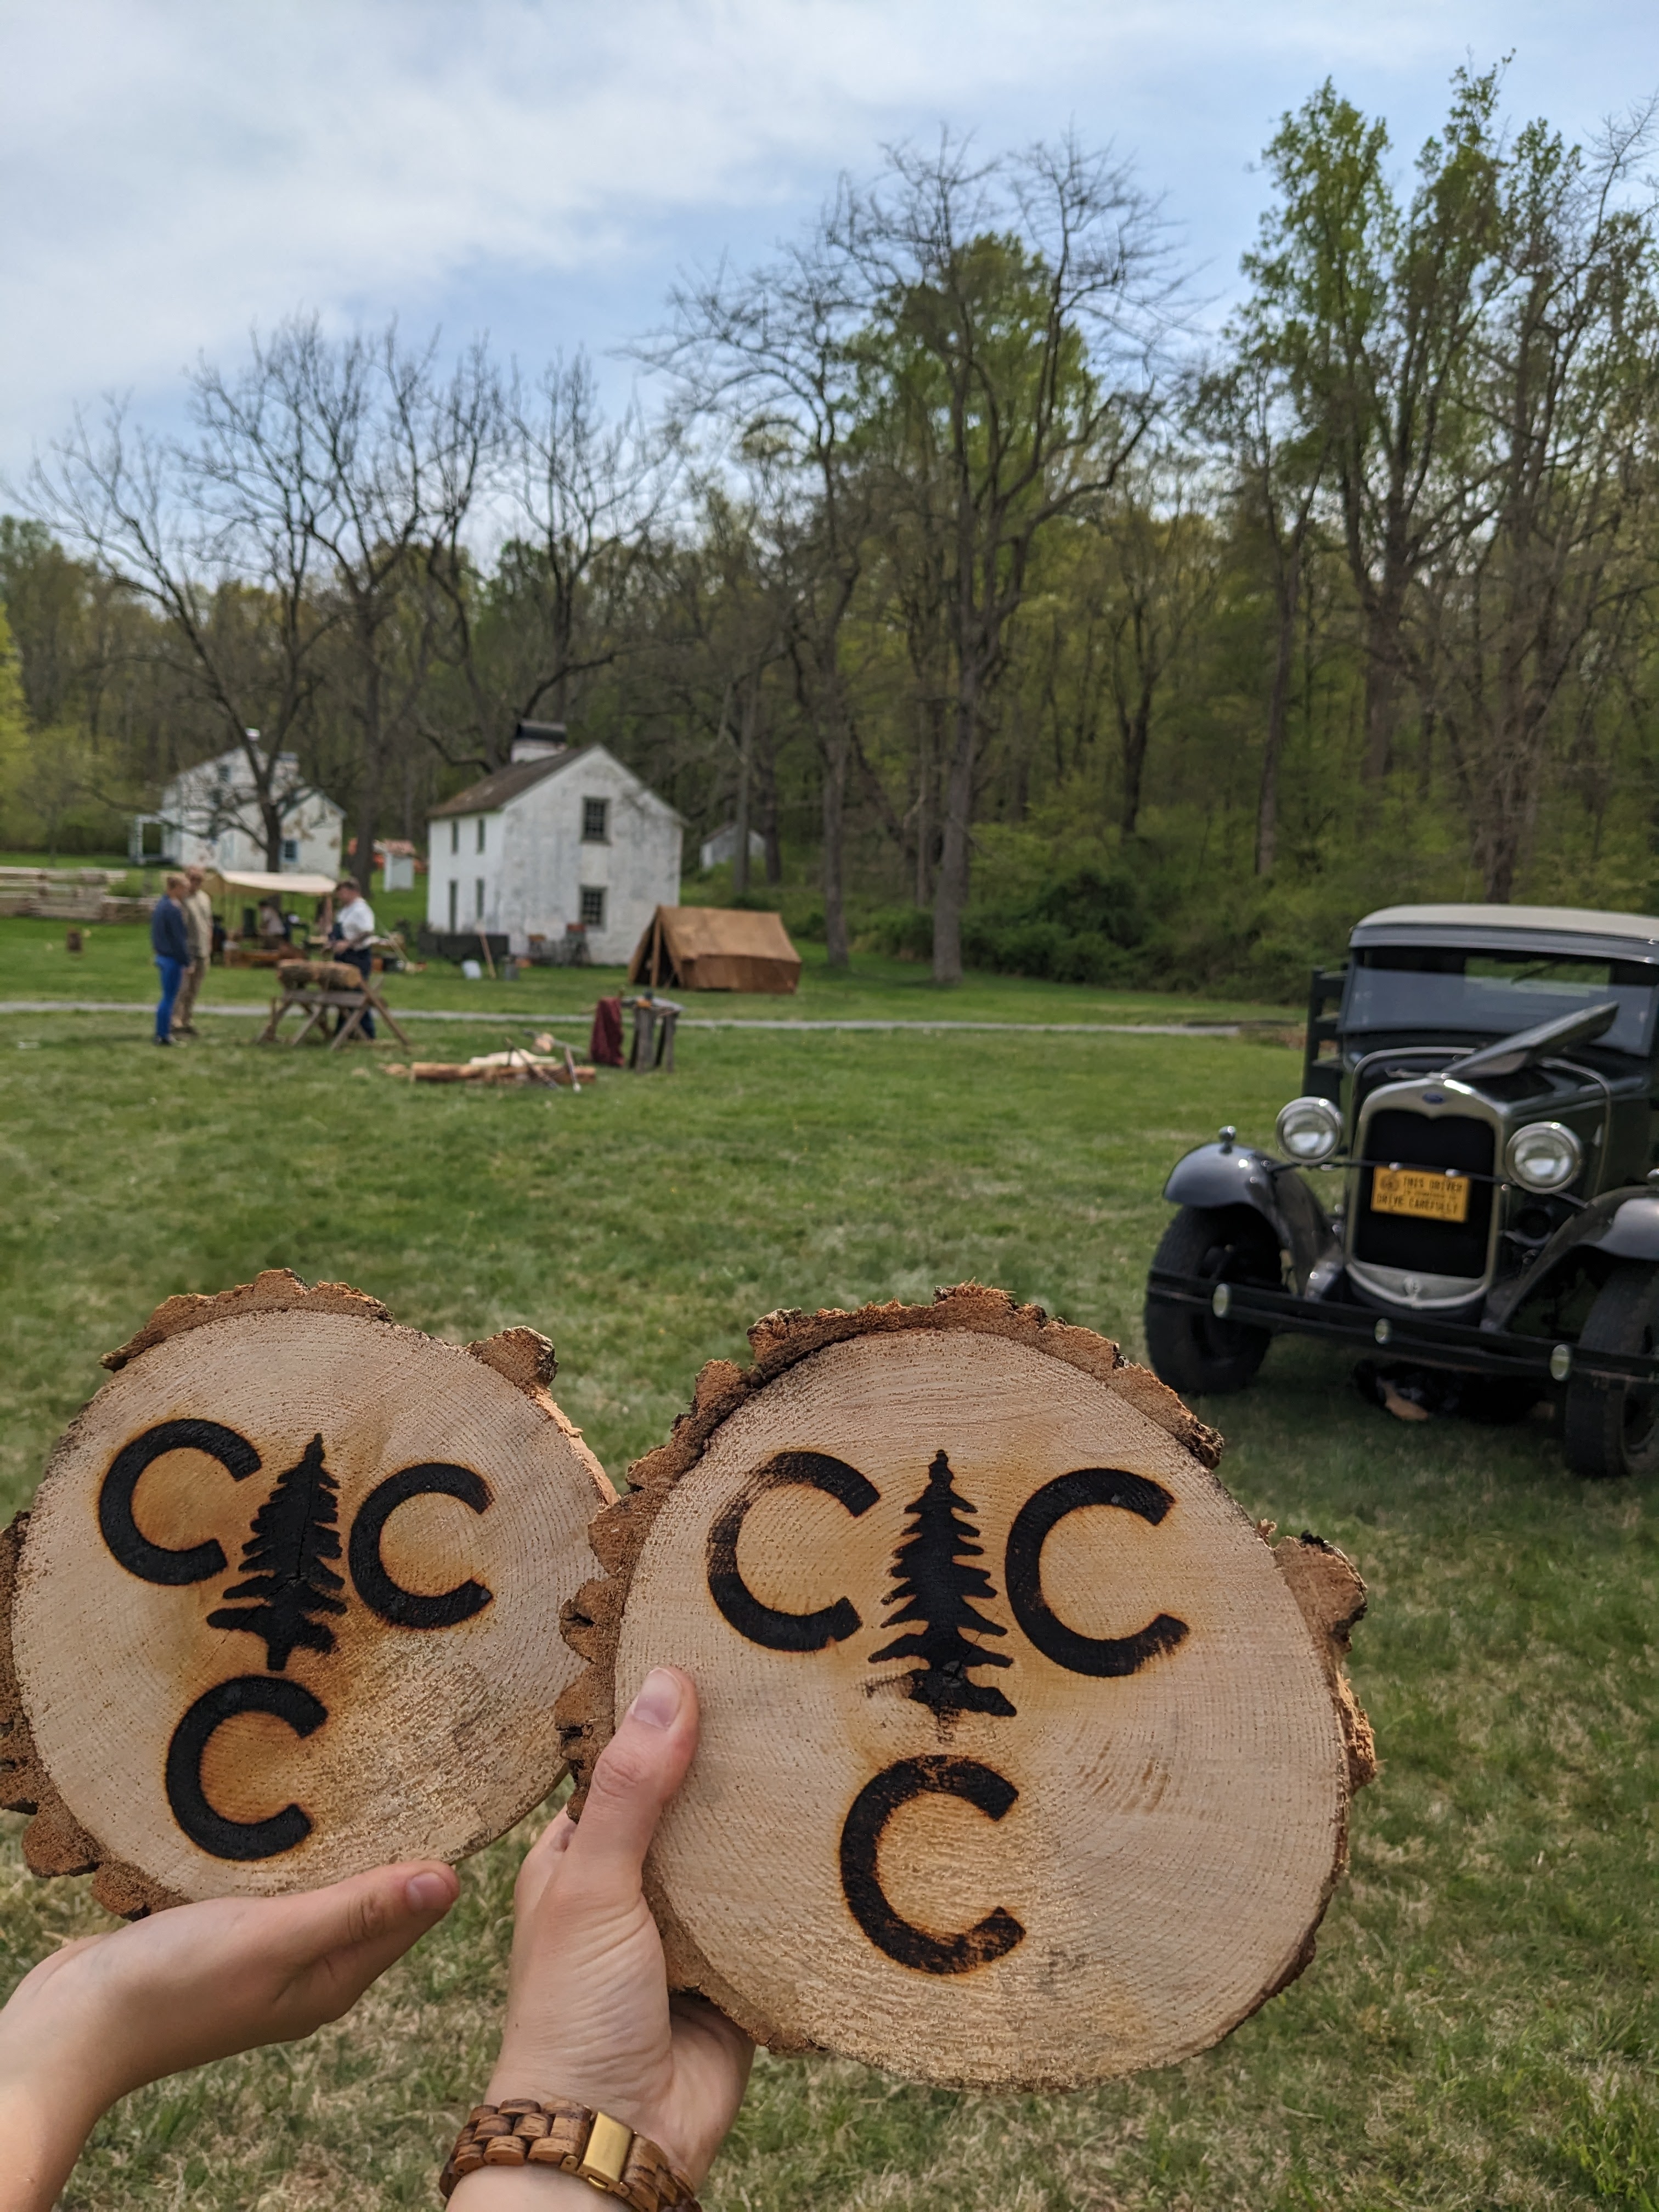 two people holding wood pieces that are branded with the CCC logo. In the background is a 1930s era truck, some tents and people walking through the historic site.